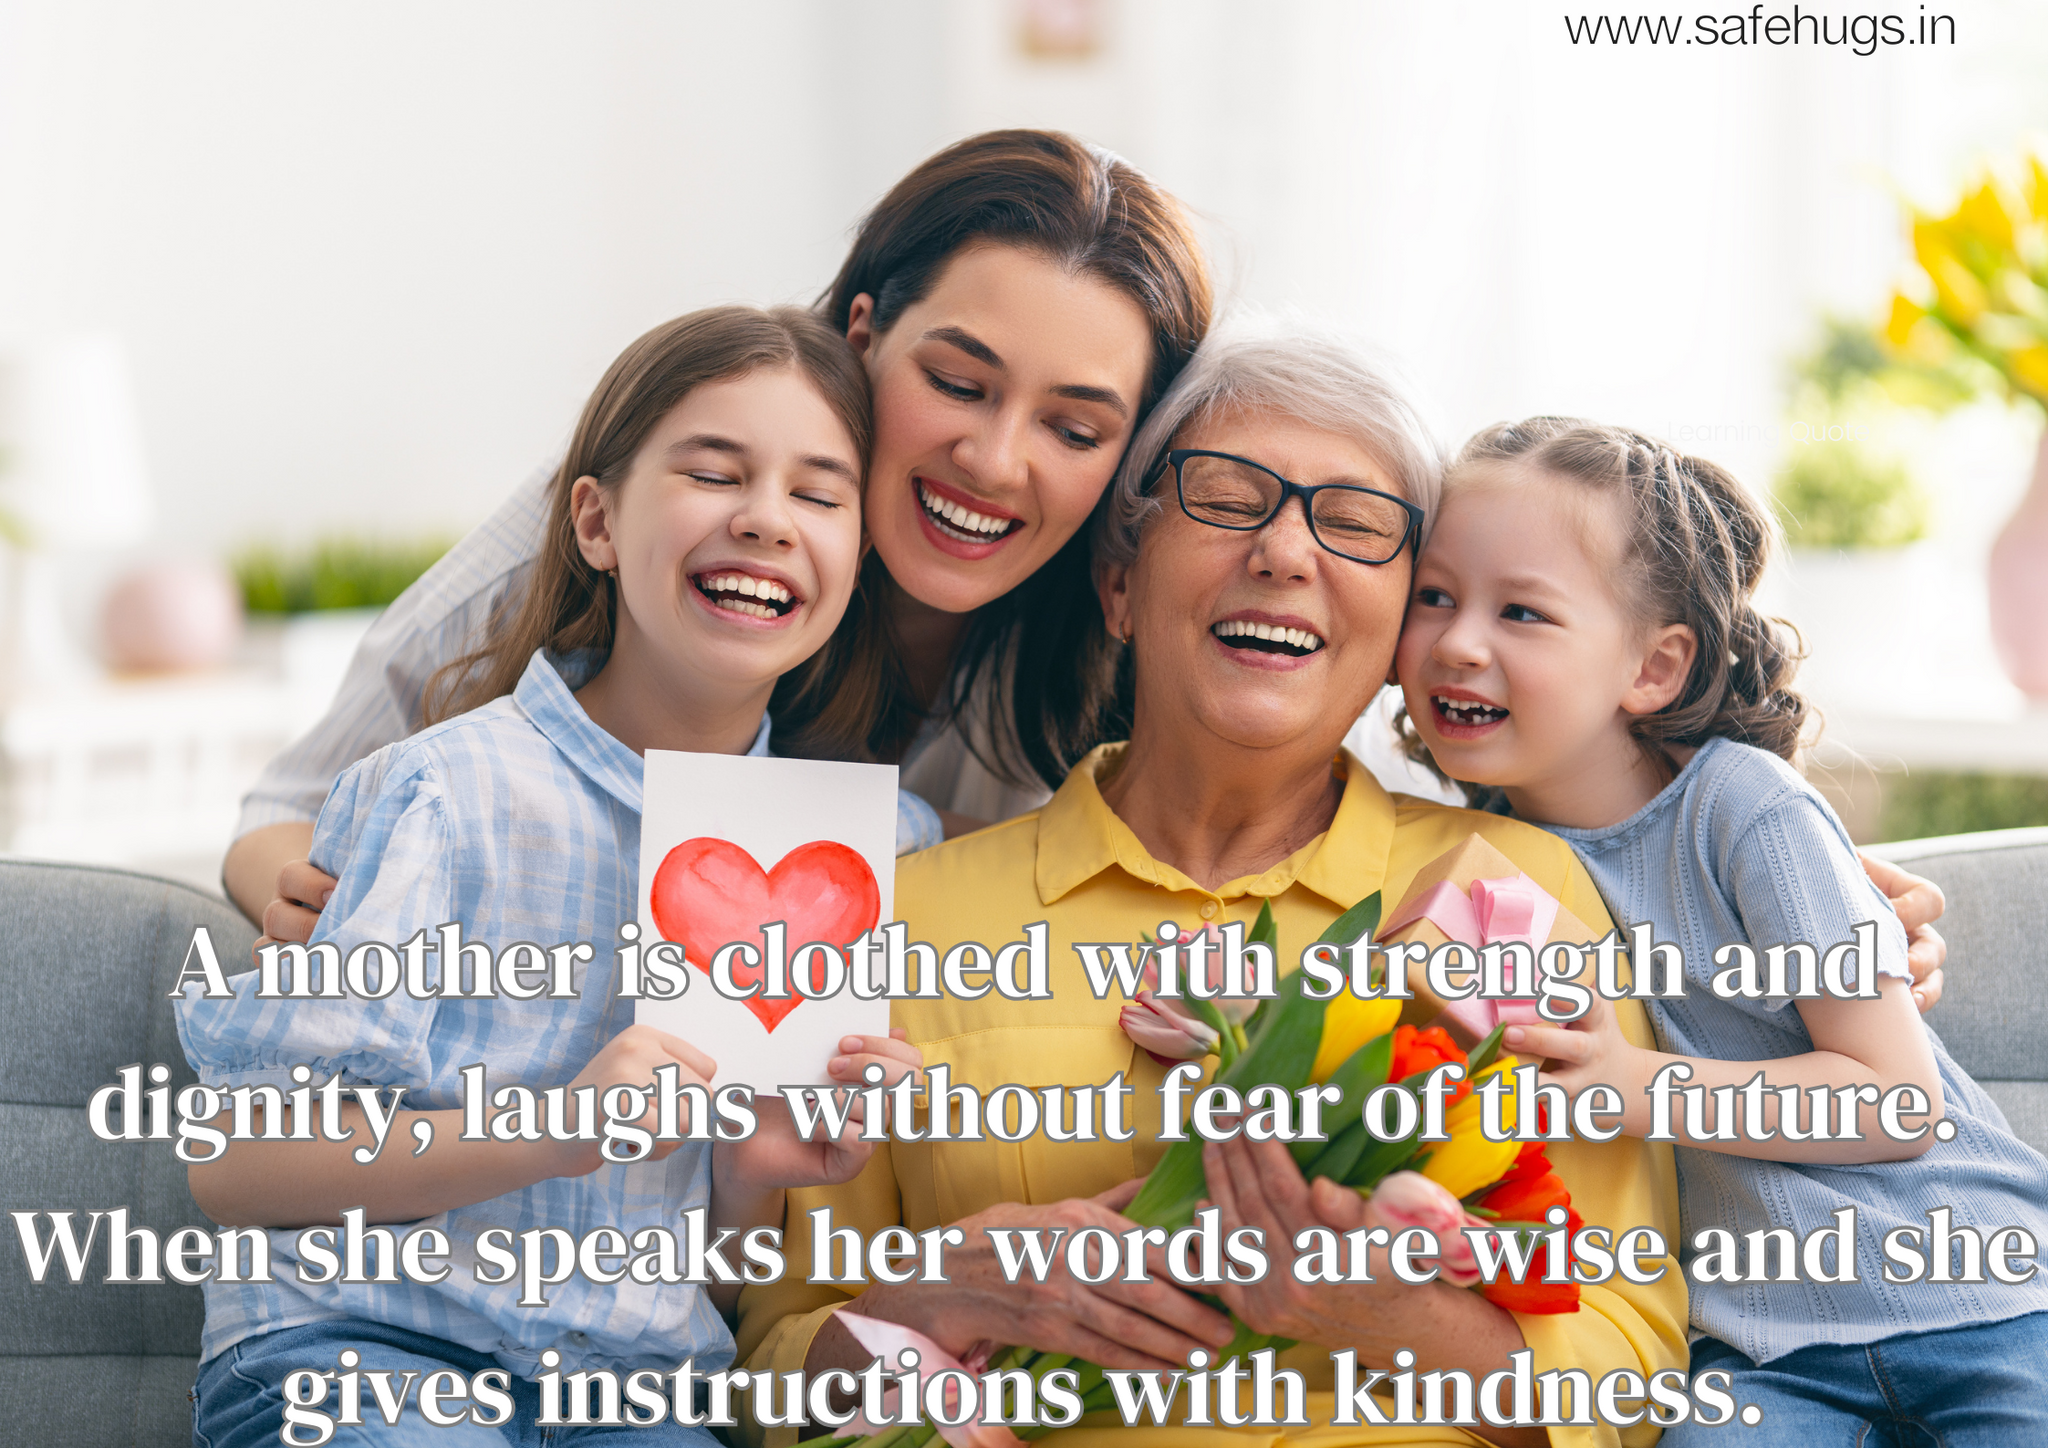 Quote: 'A mother is clothed with strength and dignity, laughs without fear, speaks wisely, and gives kind instructions.'